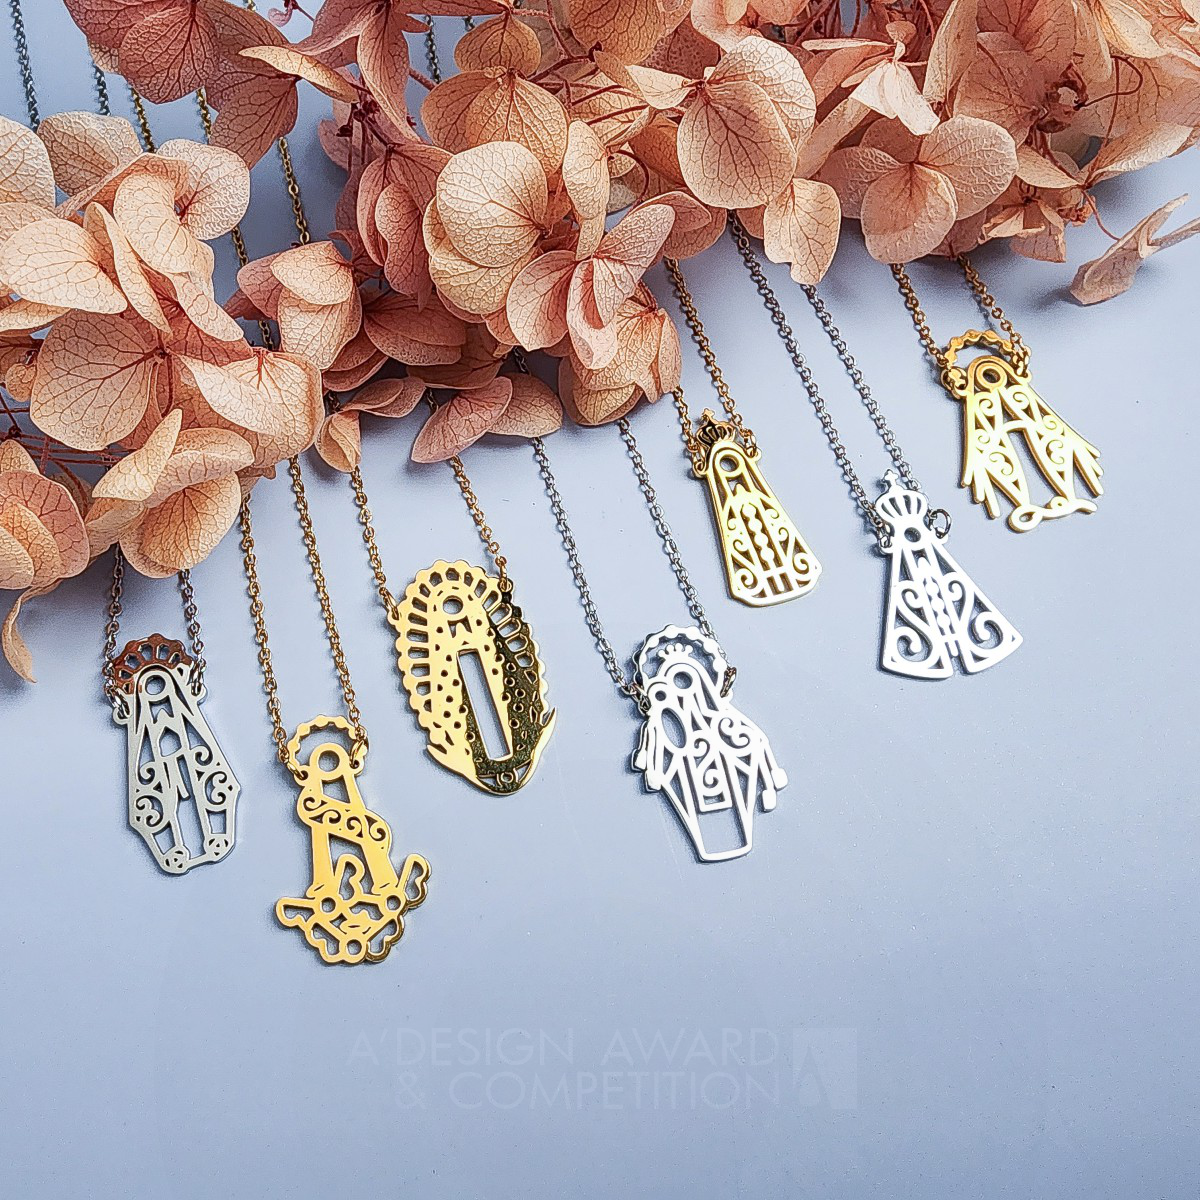 Our Lady Collection Necklaces by Camilla Marcondes